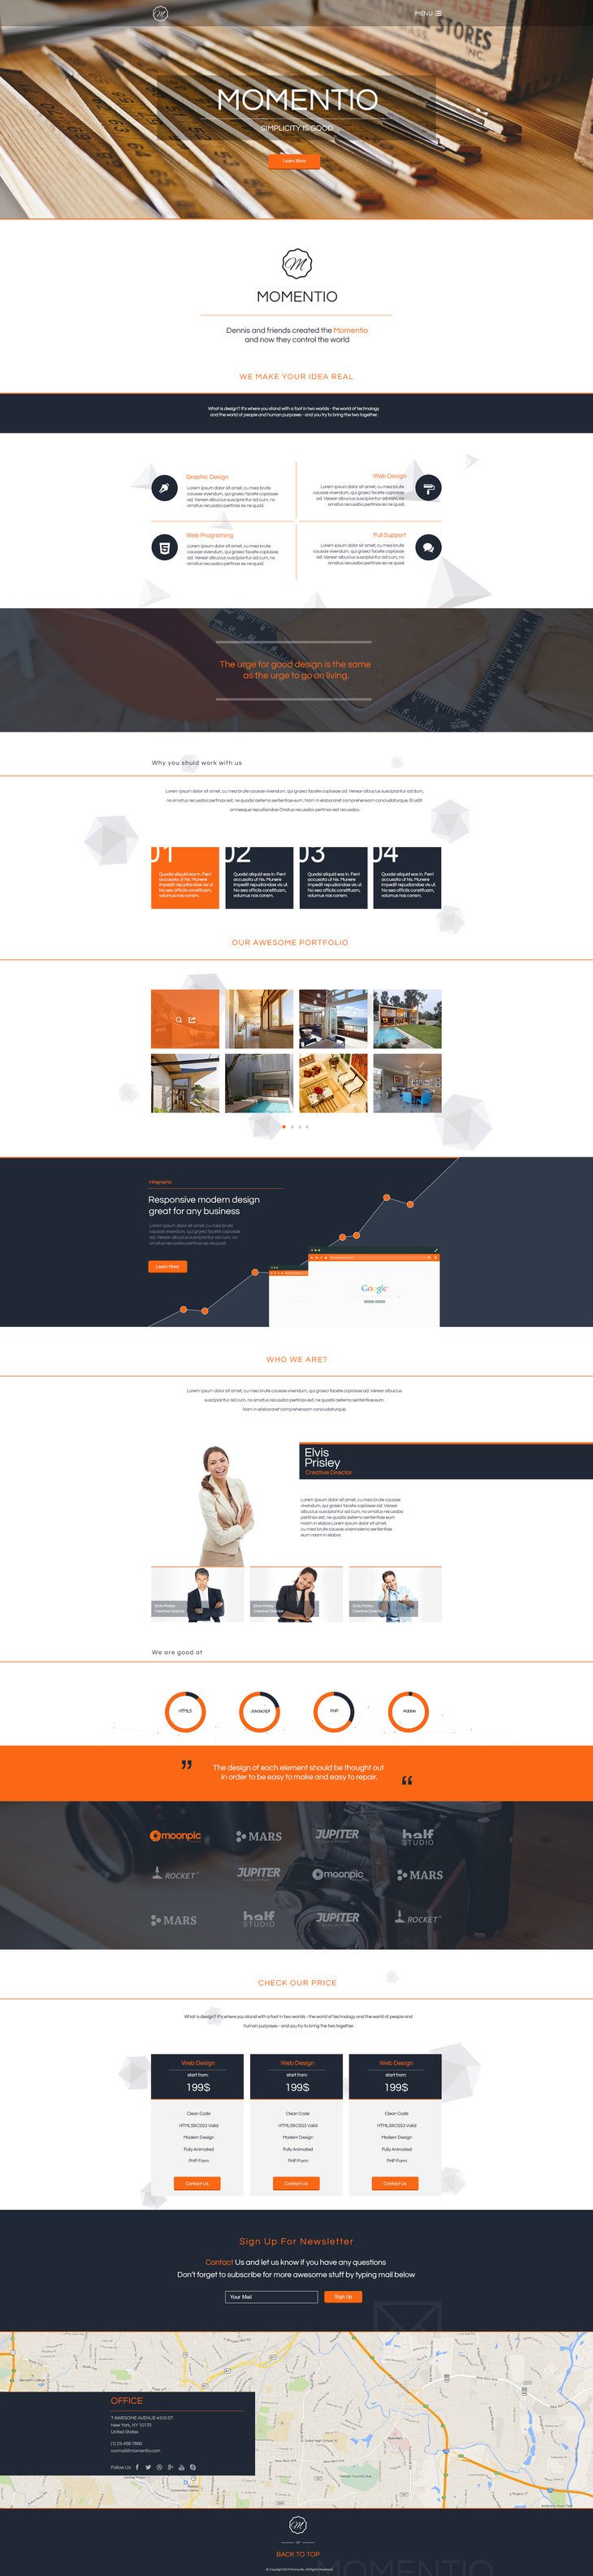 Single-Page Website Template Free